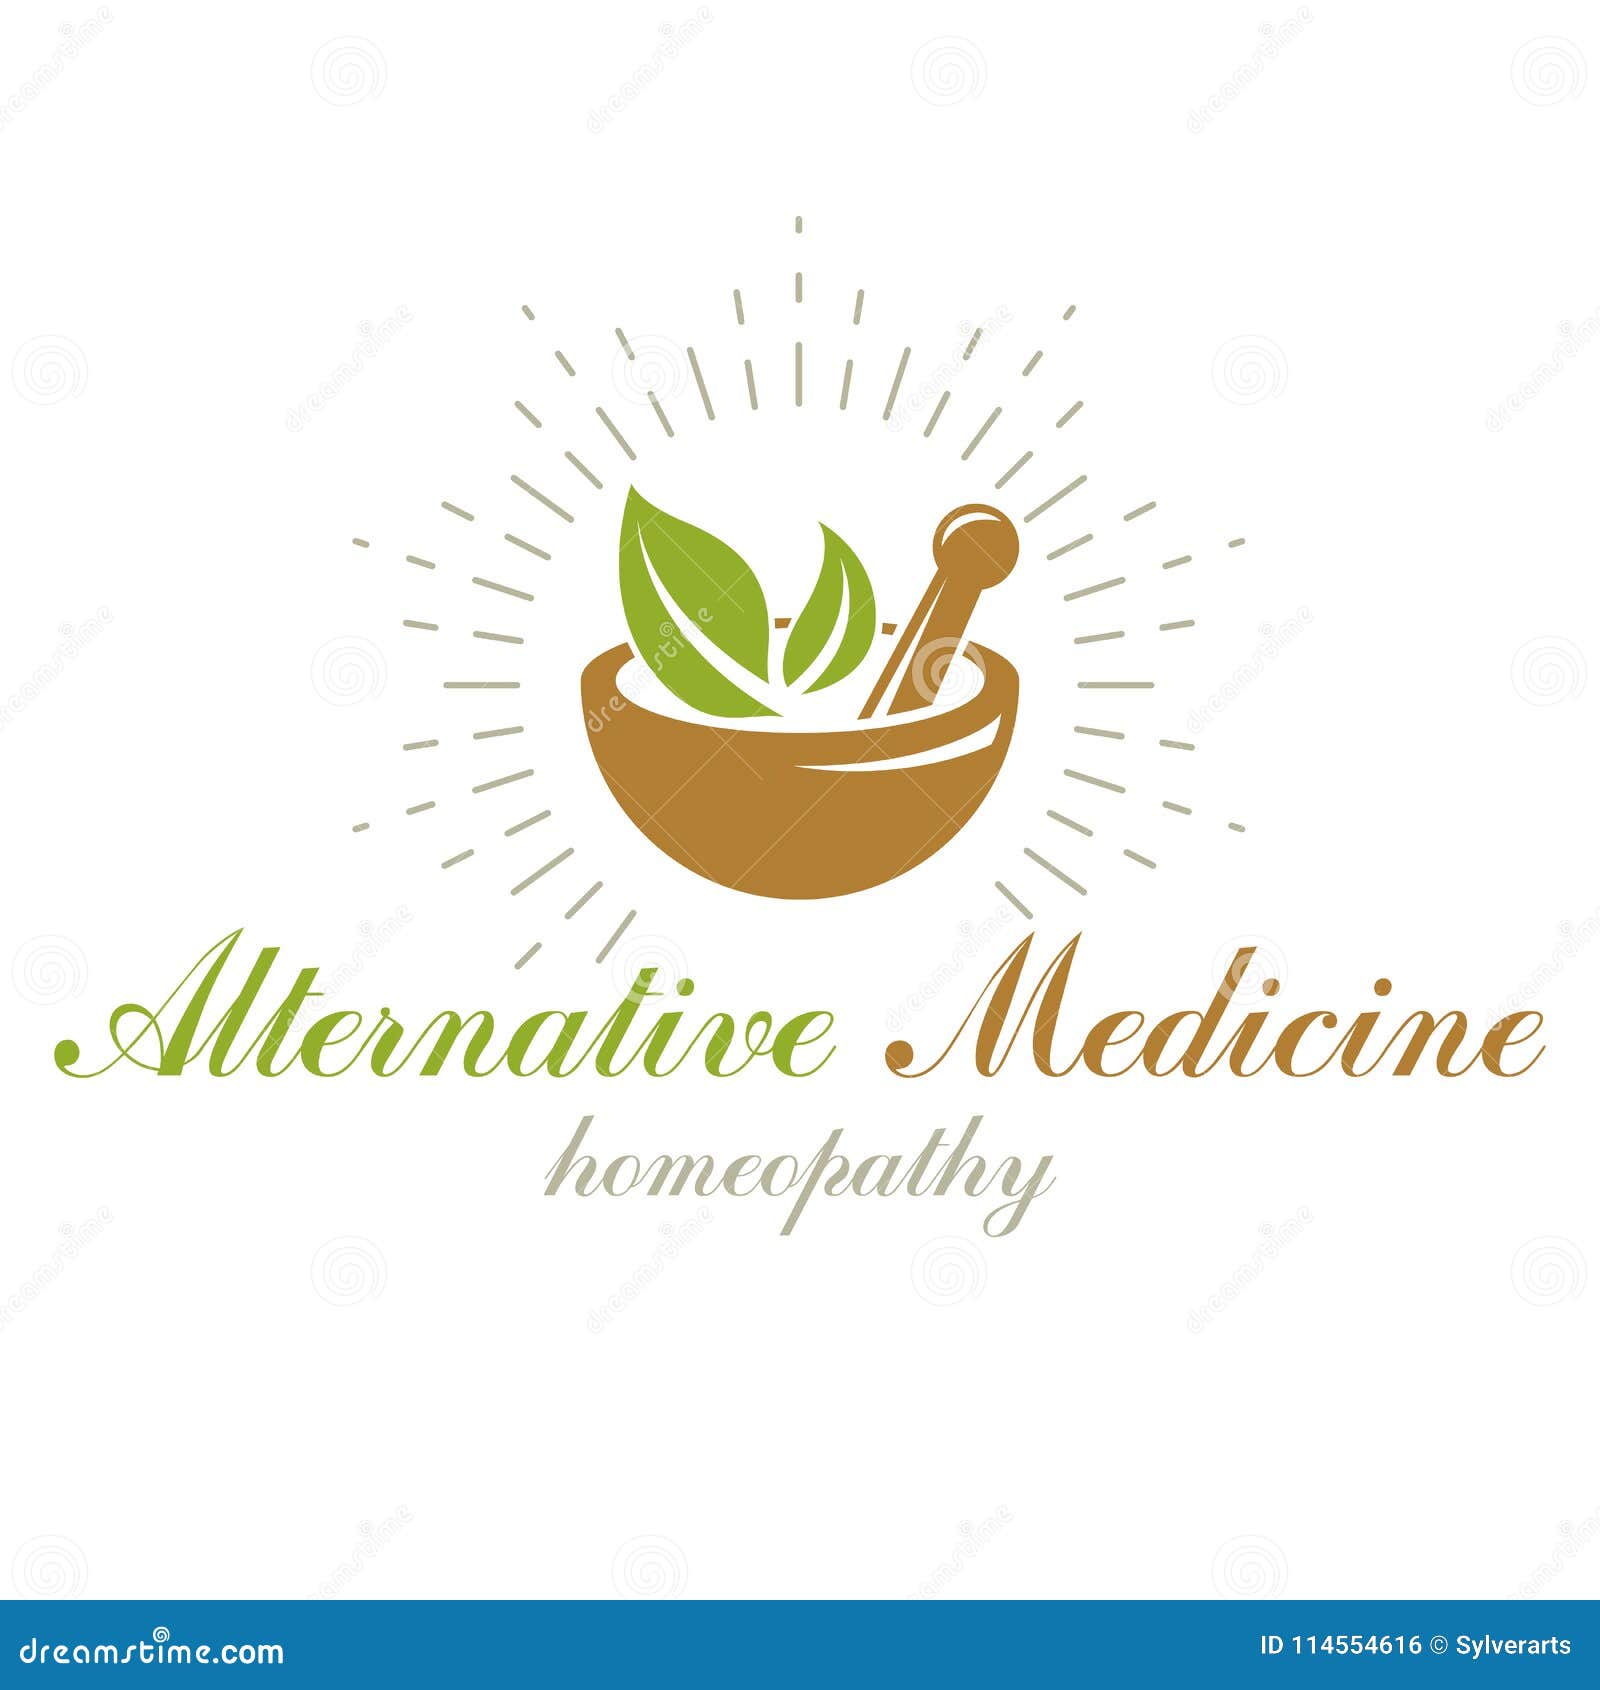 mortar and pestle graphic   composed with green leaves. homeopathy creative logo for use in medicine, rehabilitation